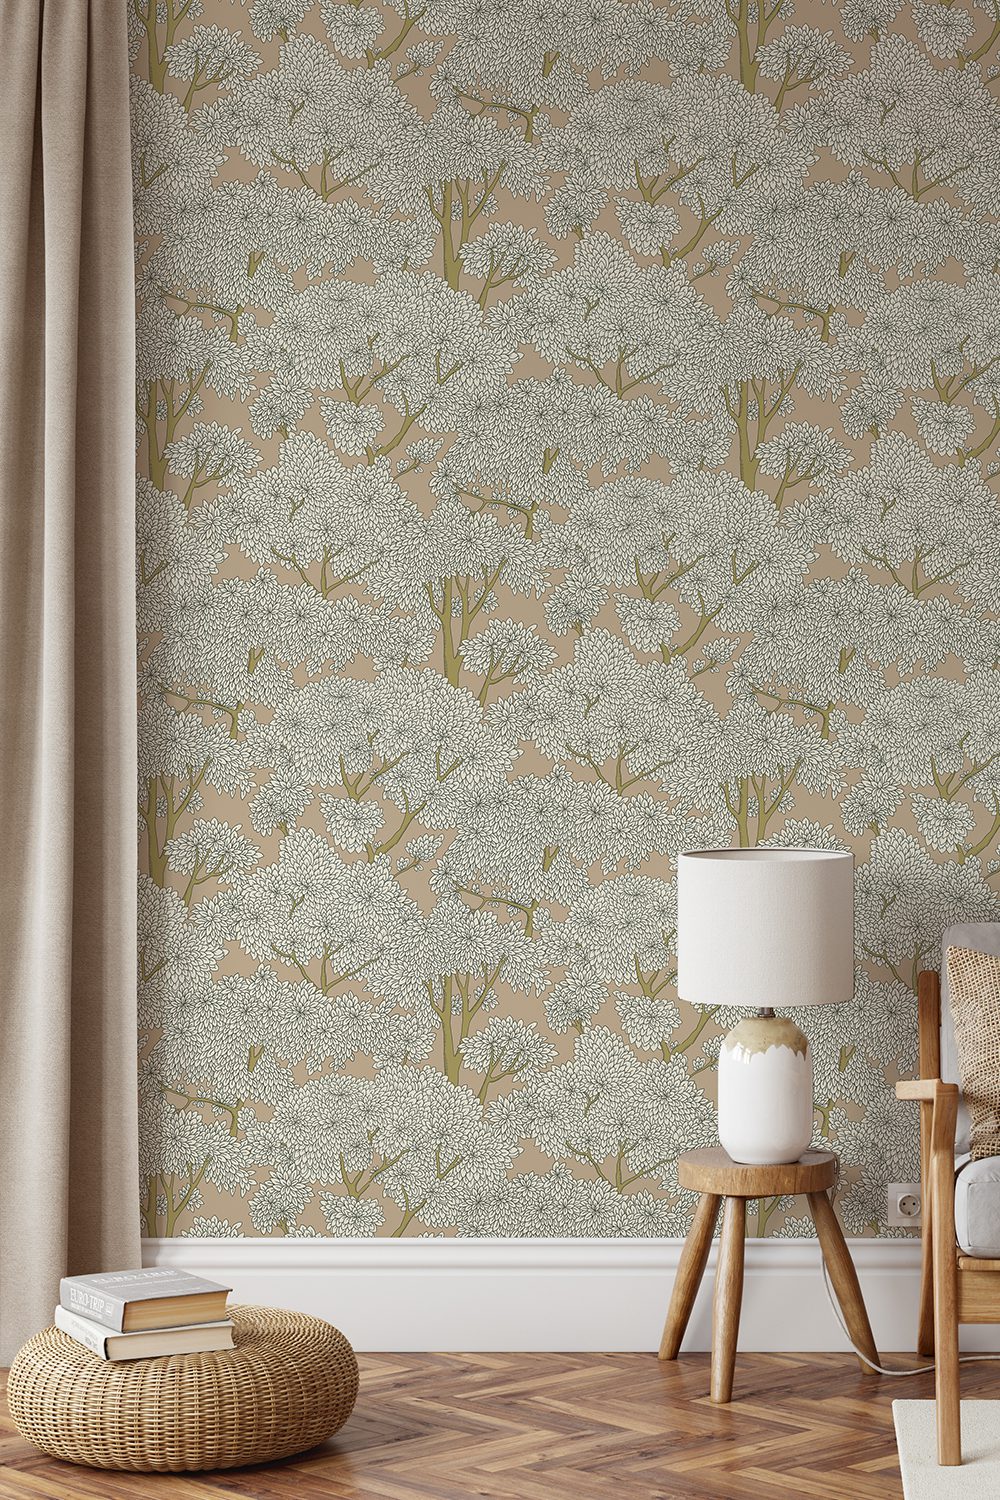 Stockend Woods Wallpaper in Stepping Stone and Cotswold White